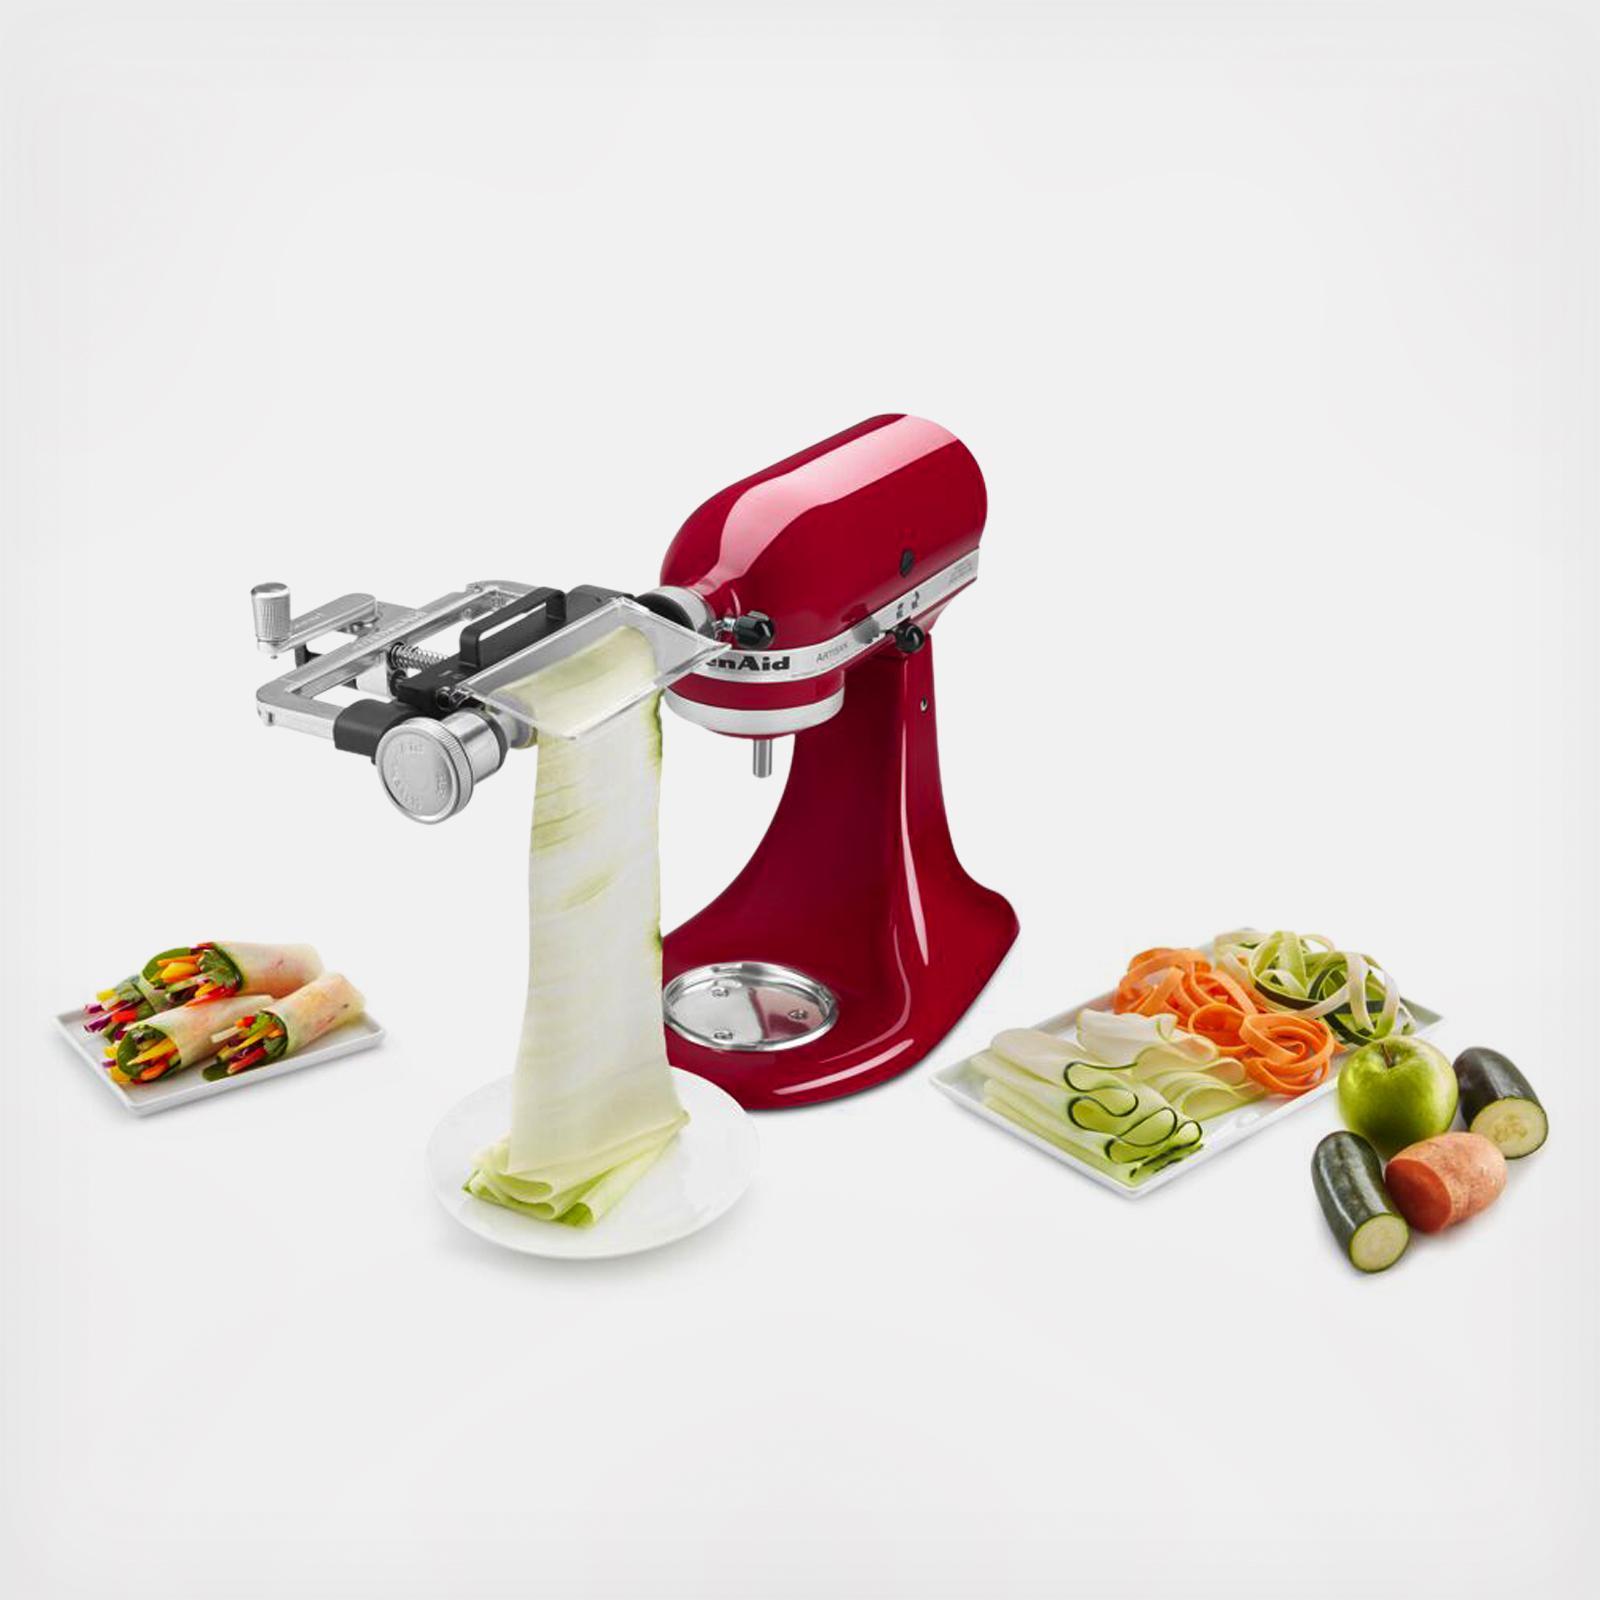 KitchenAid Vegetable Sheet Cutter Attachment with Noodle Blade KSM2SCA